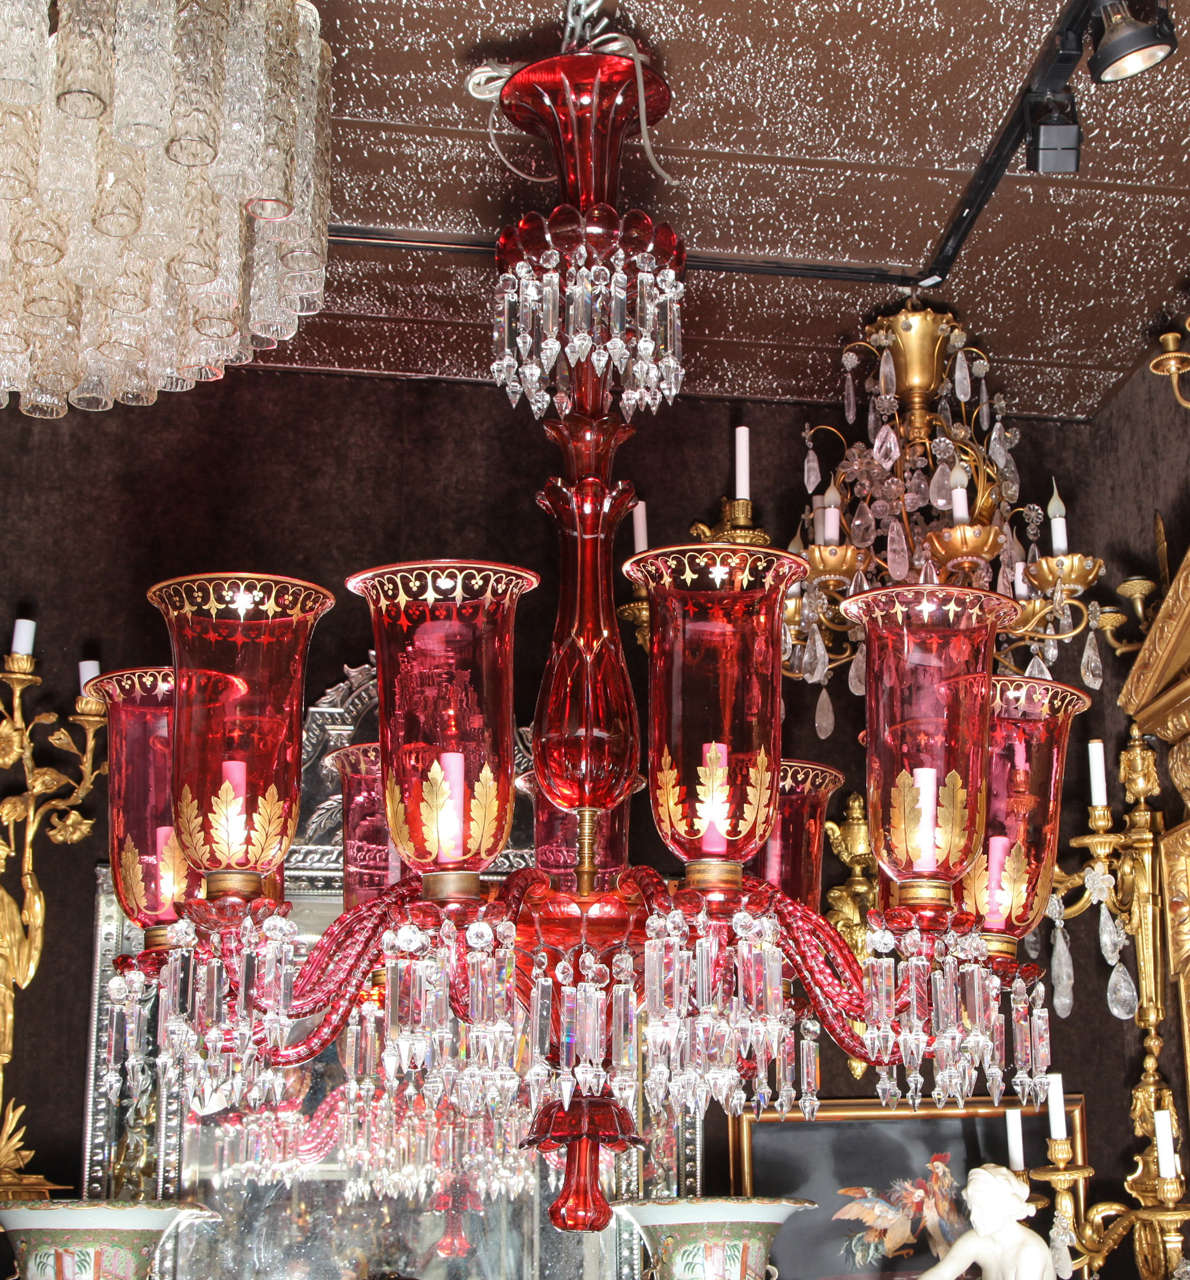 An exquisite antique Baccarat ruby red and clear crystal double overlay eleven-light chandelier with original hurricane shades. This magnificent chandelier has eleven arms that snake first down then up to the hurricane shades, which are decorated